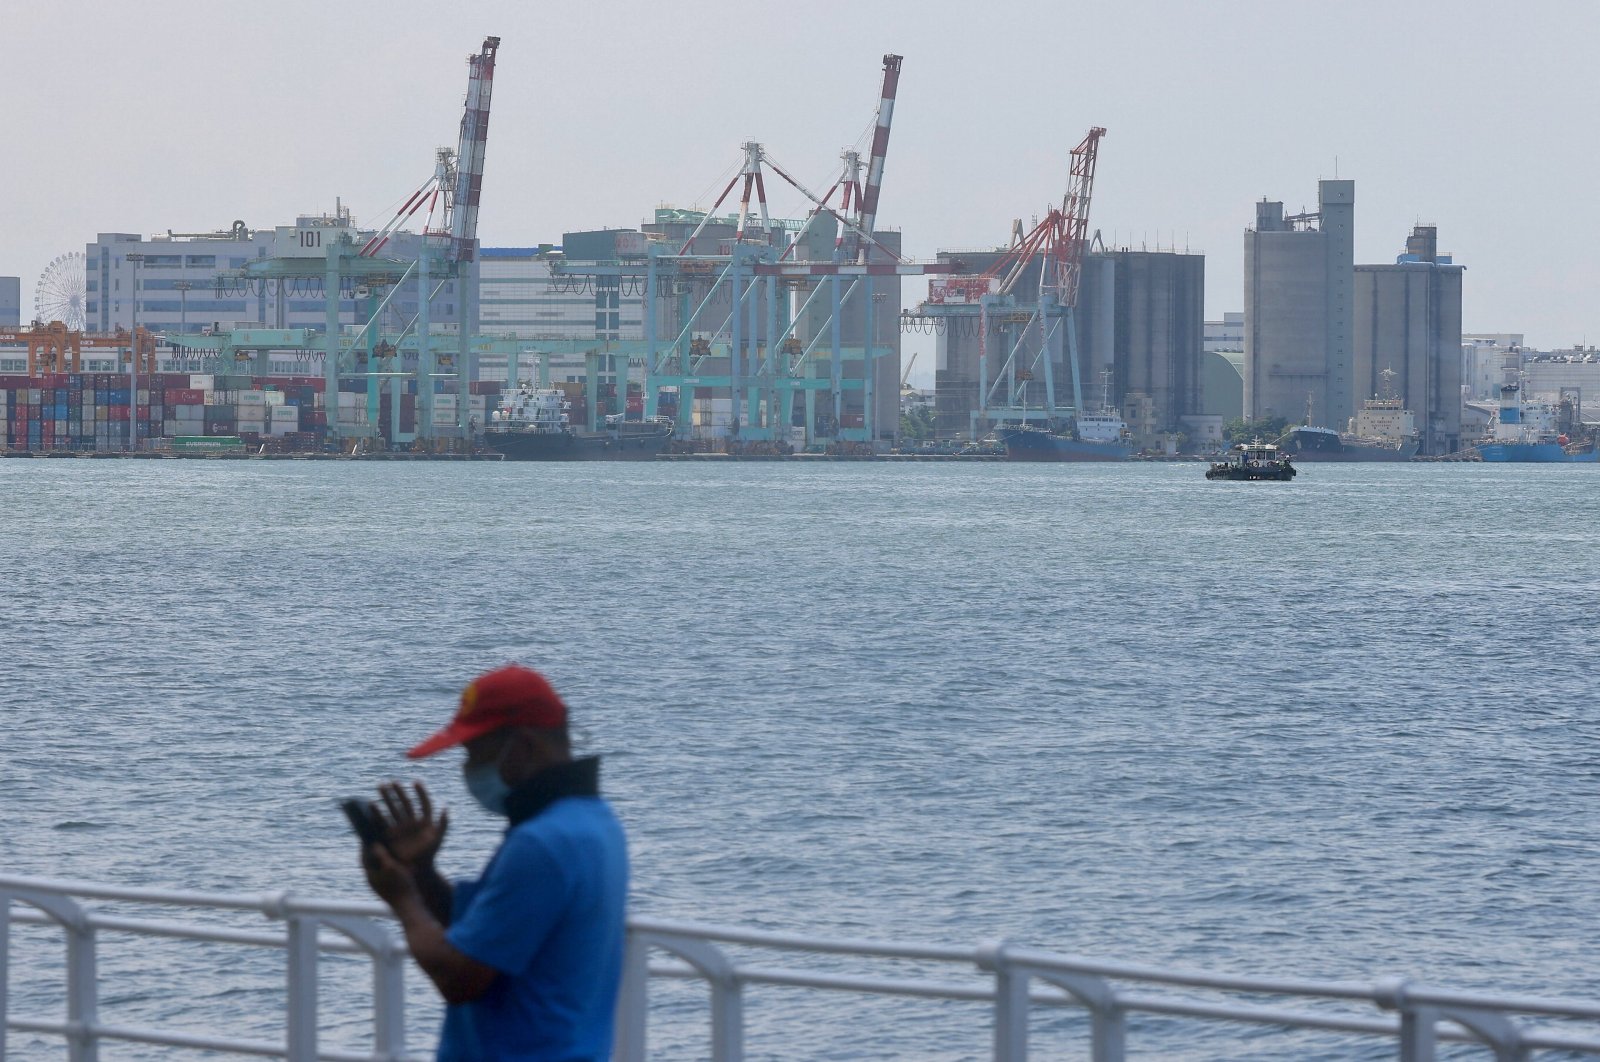 A man look at his phone in front of the port in Kaohsiung, Taiwan, Aug. 5, 2022. (Reuters Photo)